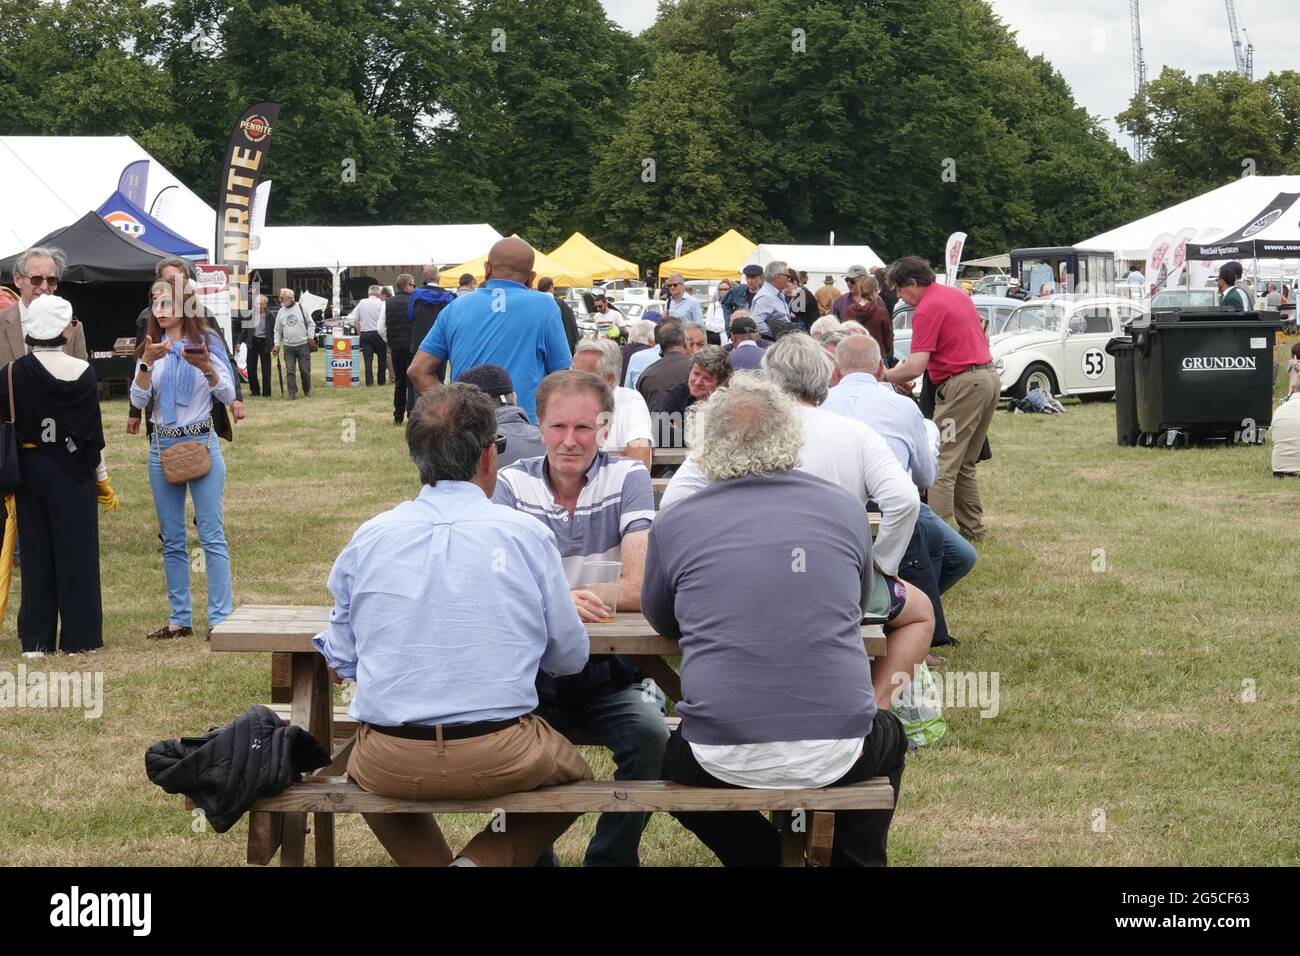 Brentford, UK. 25th June 2021. Scenes at the LONDON CLASSIC Car Show - here, Masks offÉ. Every single guest, spectator forgot their Covid protection masks on a lovely day out in West London. Credit: Motofoto/Alamy Live News Stock Photo